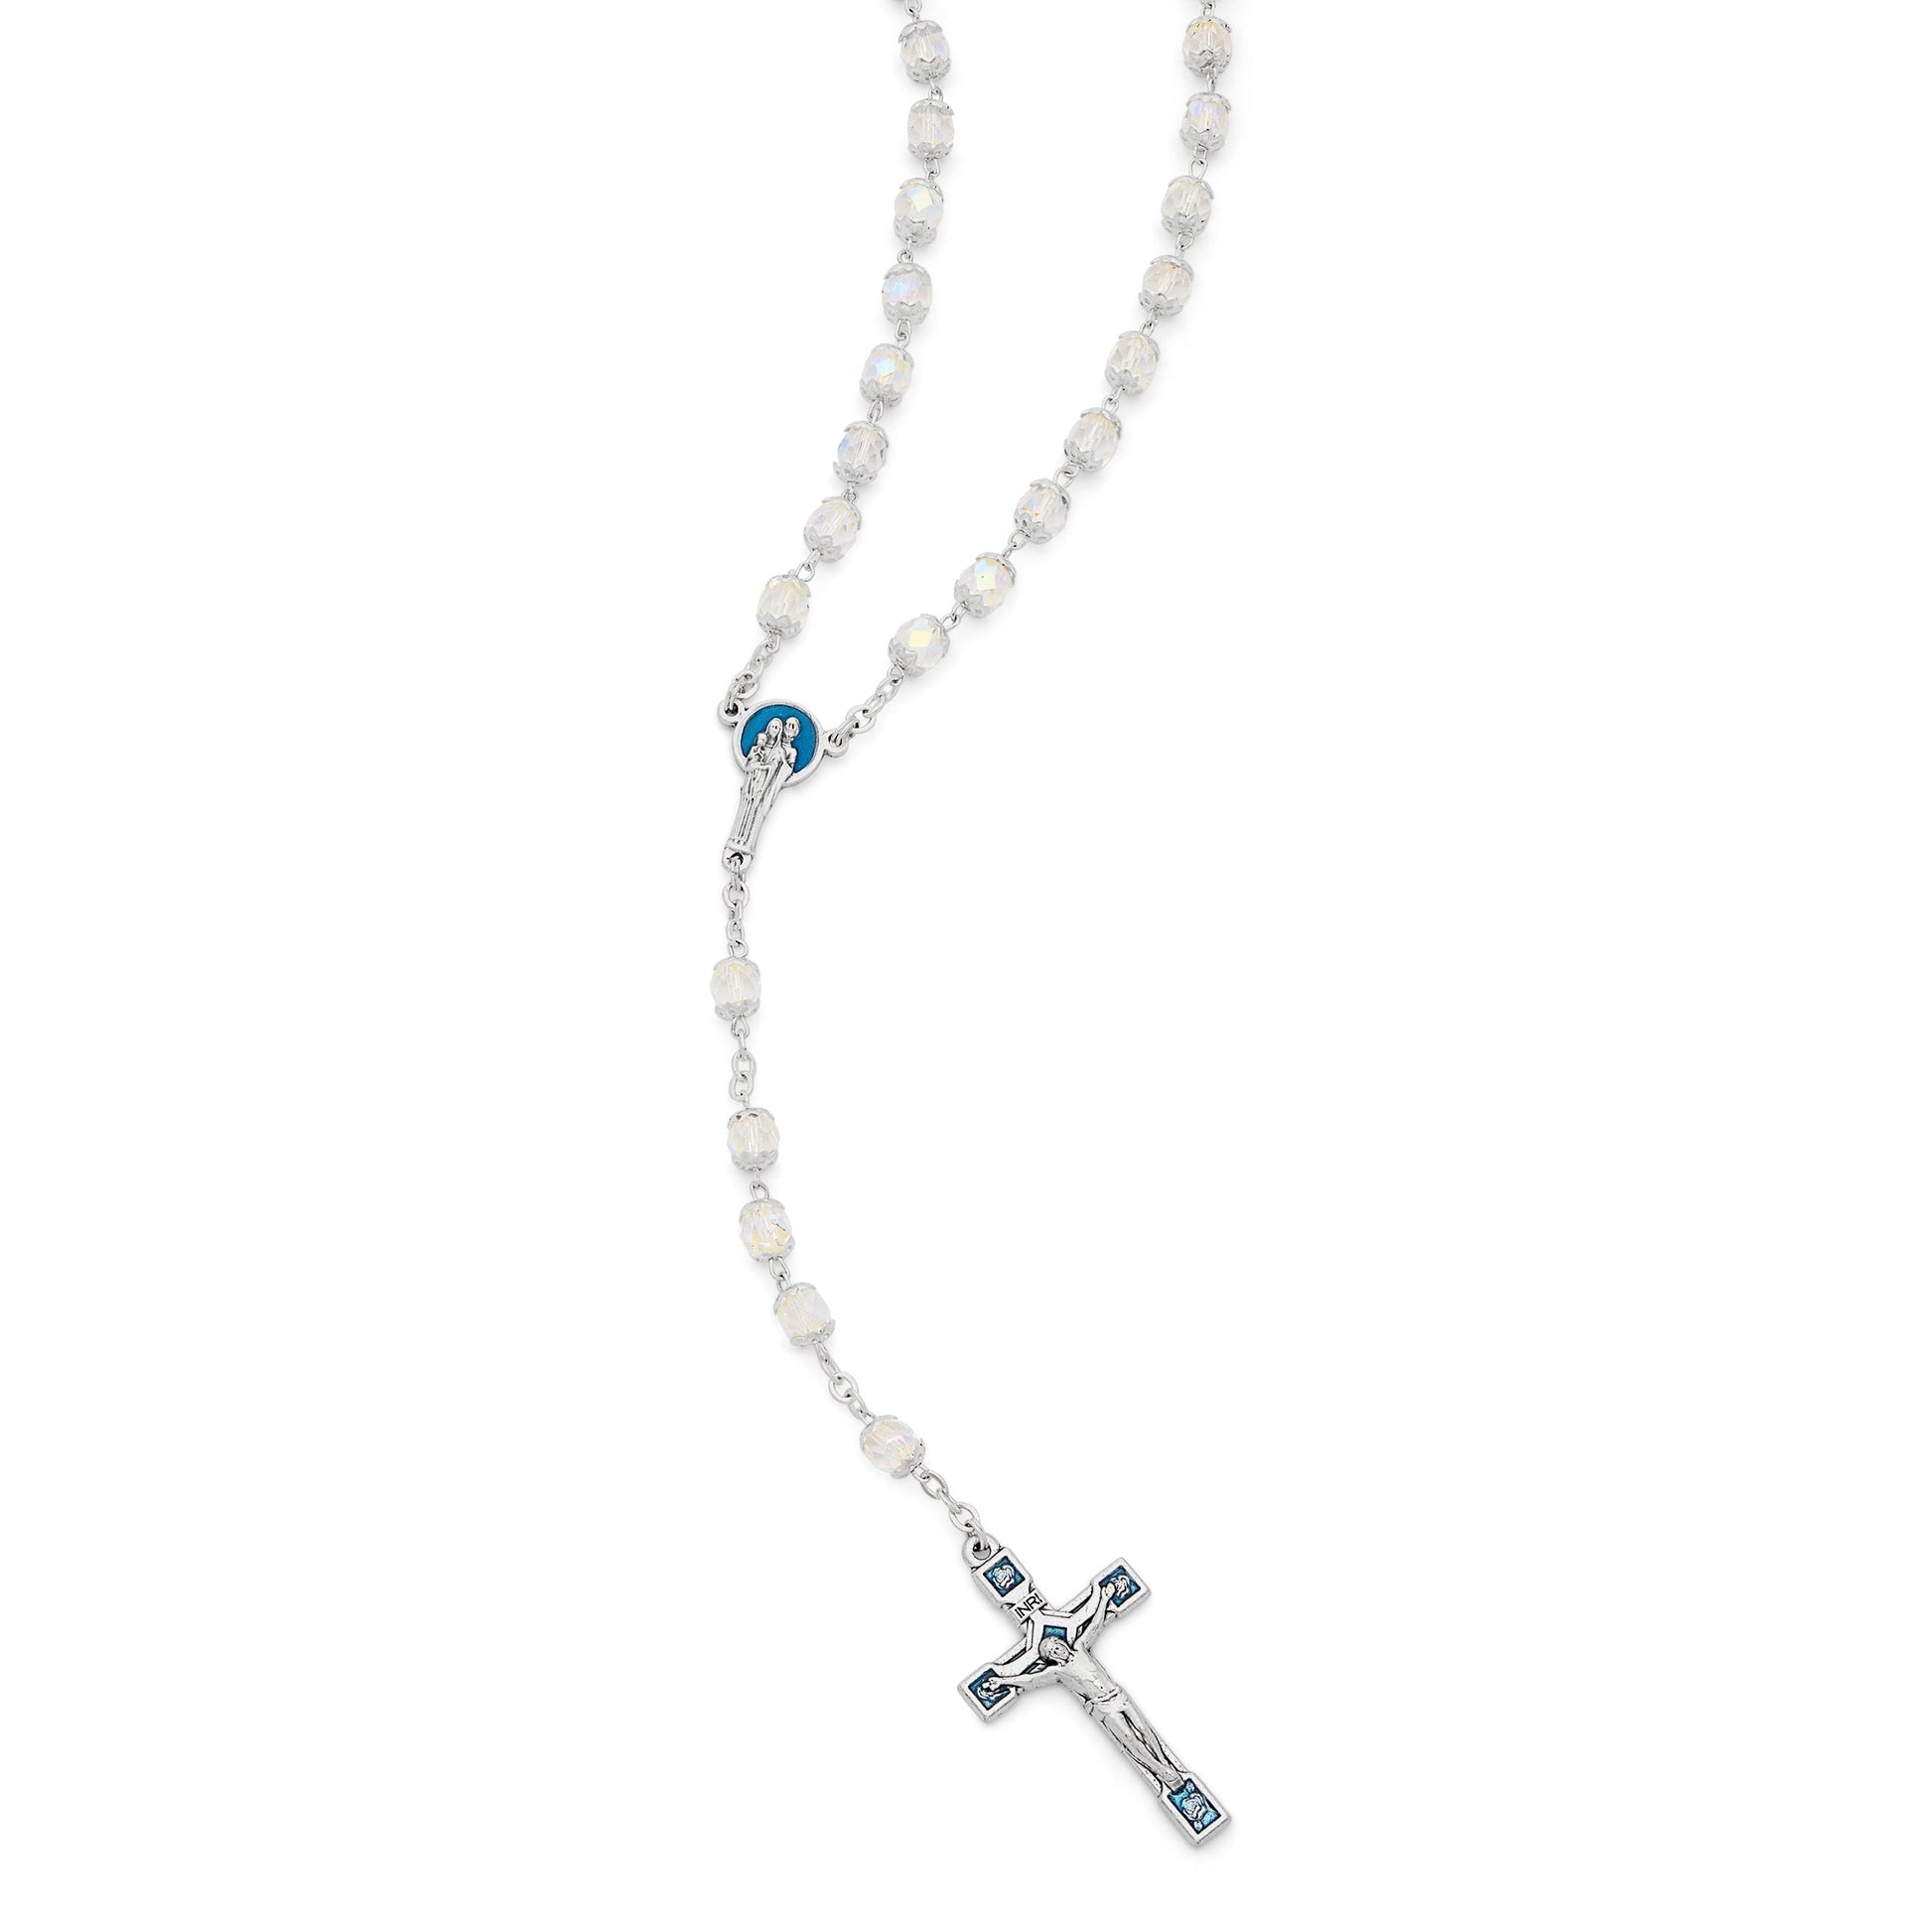 MONDO CATTOLICO Prayer Beads Holy Family Rosary Beads in Transparent Faceted Crystal